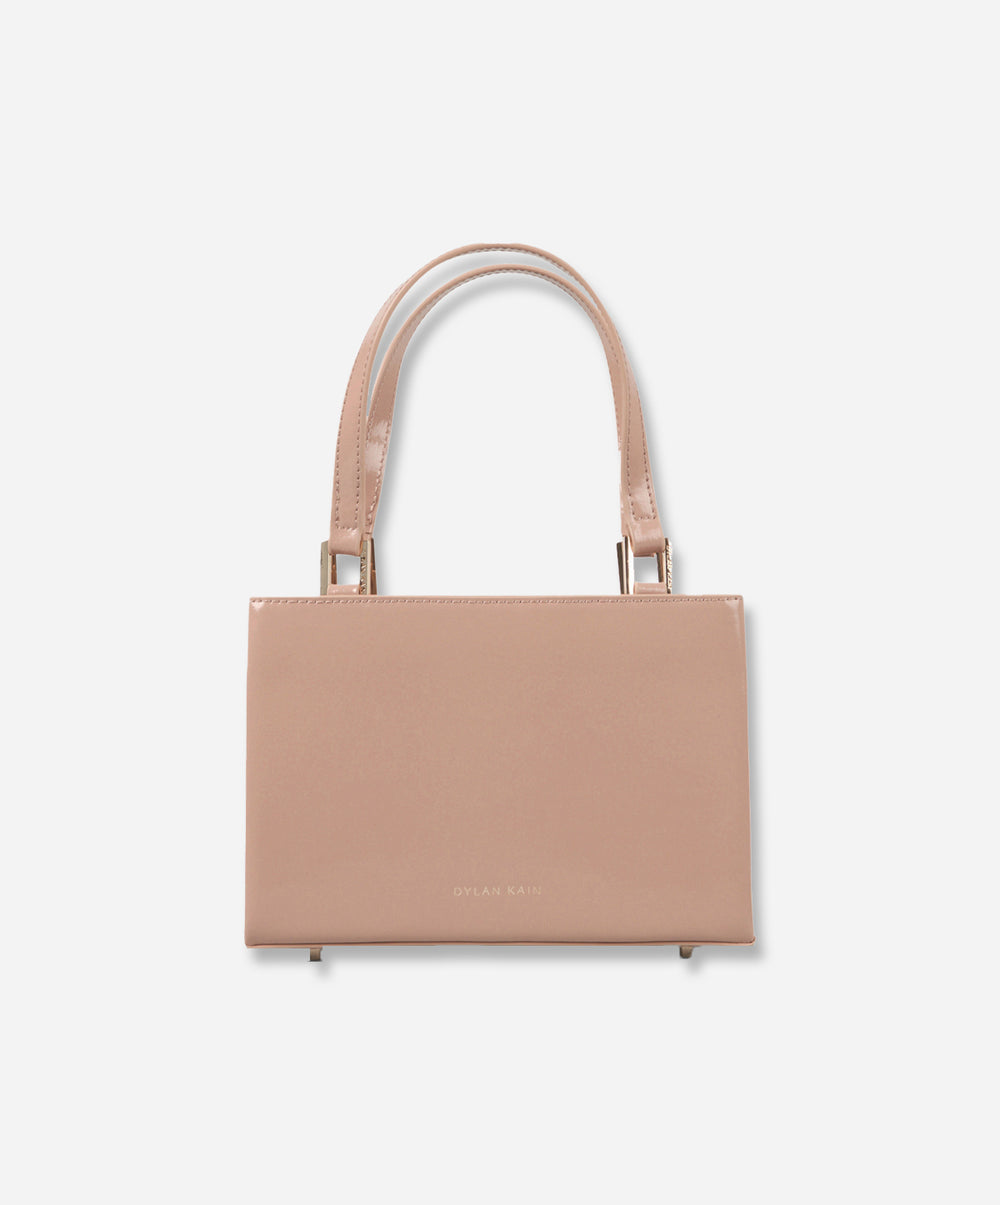 The Paltrow Patent Bag